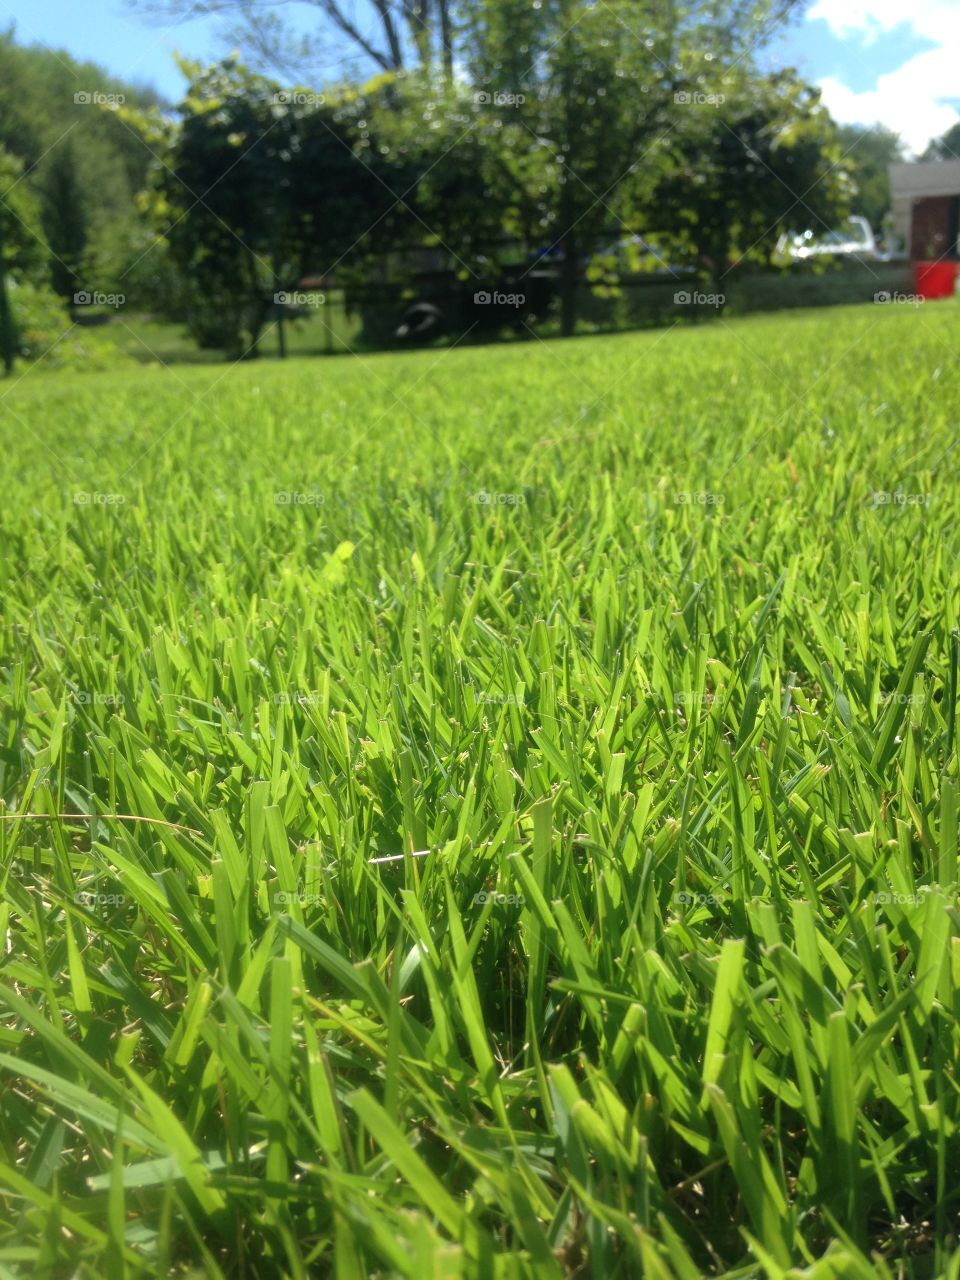 Grass. Laying out in the grass.